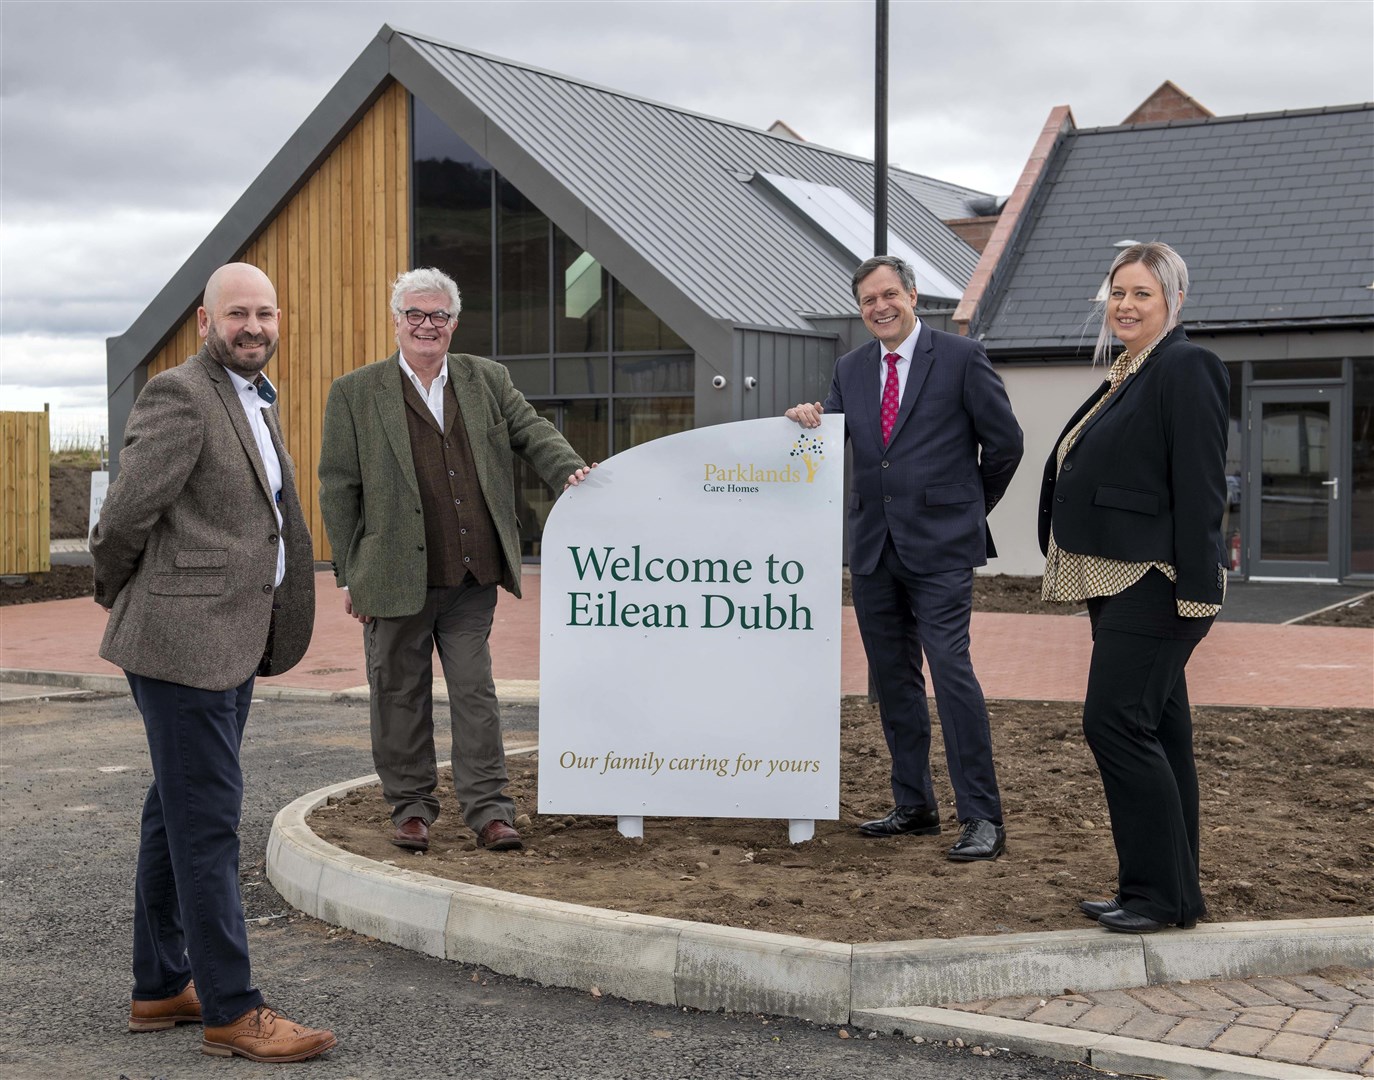 The new Parklands care home Eilean Dubh in Fortrose will welcome its first residents next week. Architect Bryan McFadzean, Black isle cares chairman Brian Devlin and the company's Ron Taylor and Sharon Reid prepare for a tour.